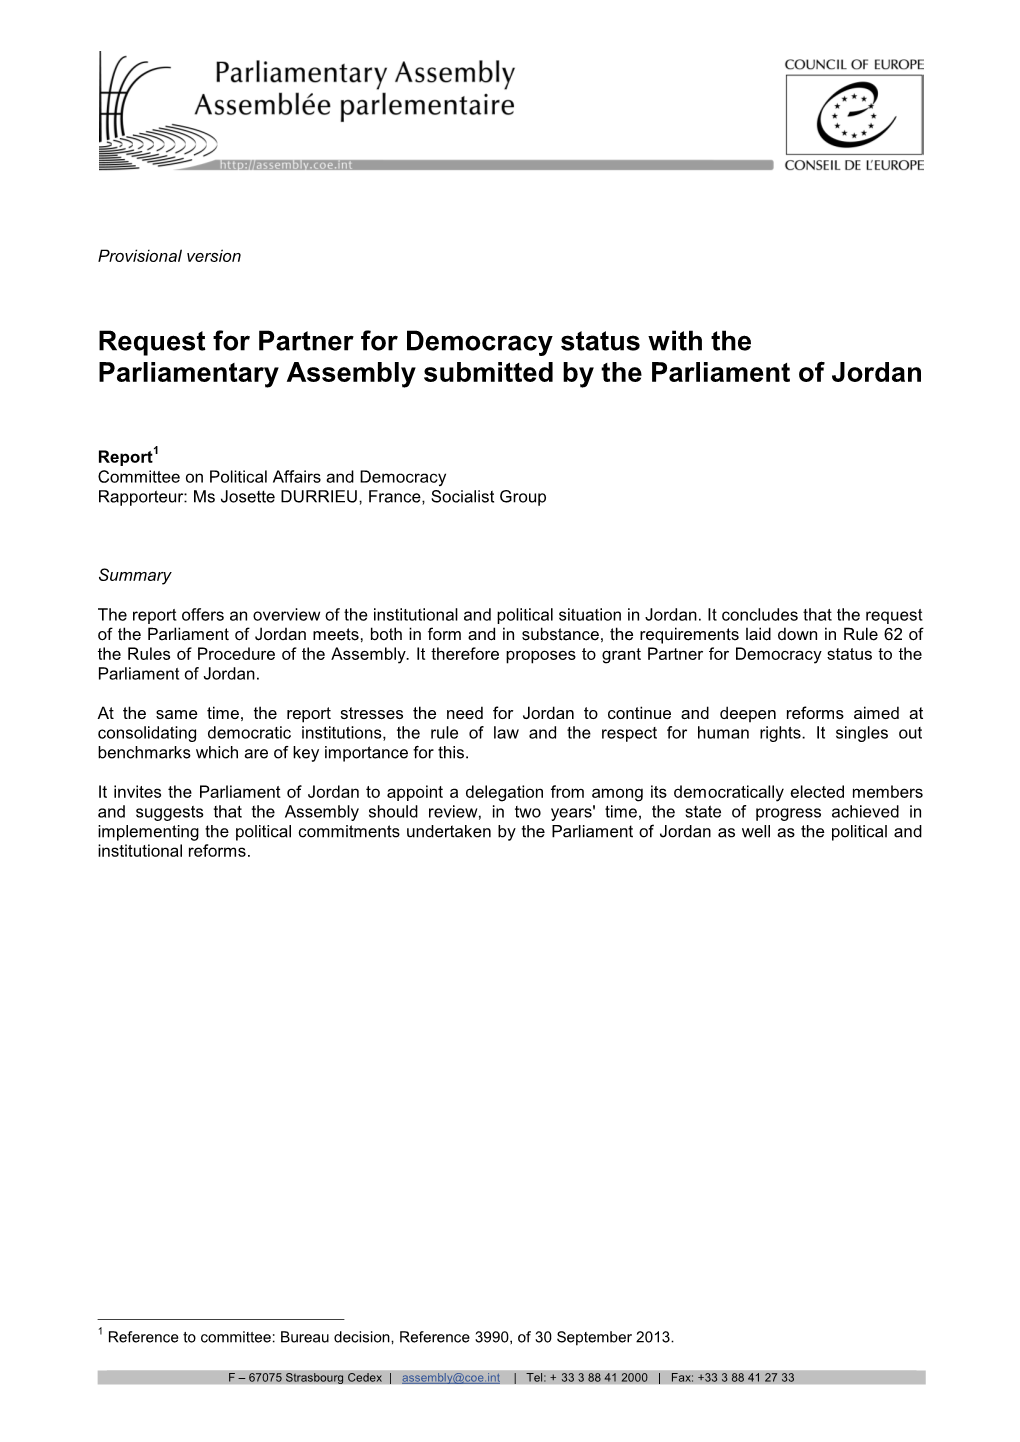 Request for Partner for Democracy Status with the Parliamentary Assembly Submitted by the Parliament of Jordan